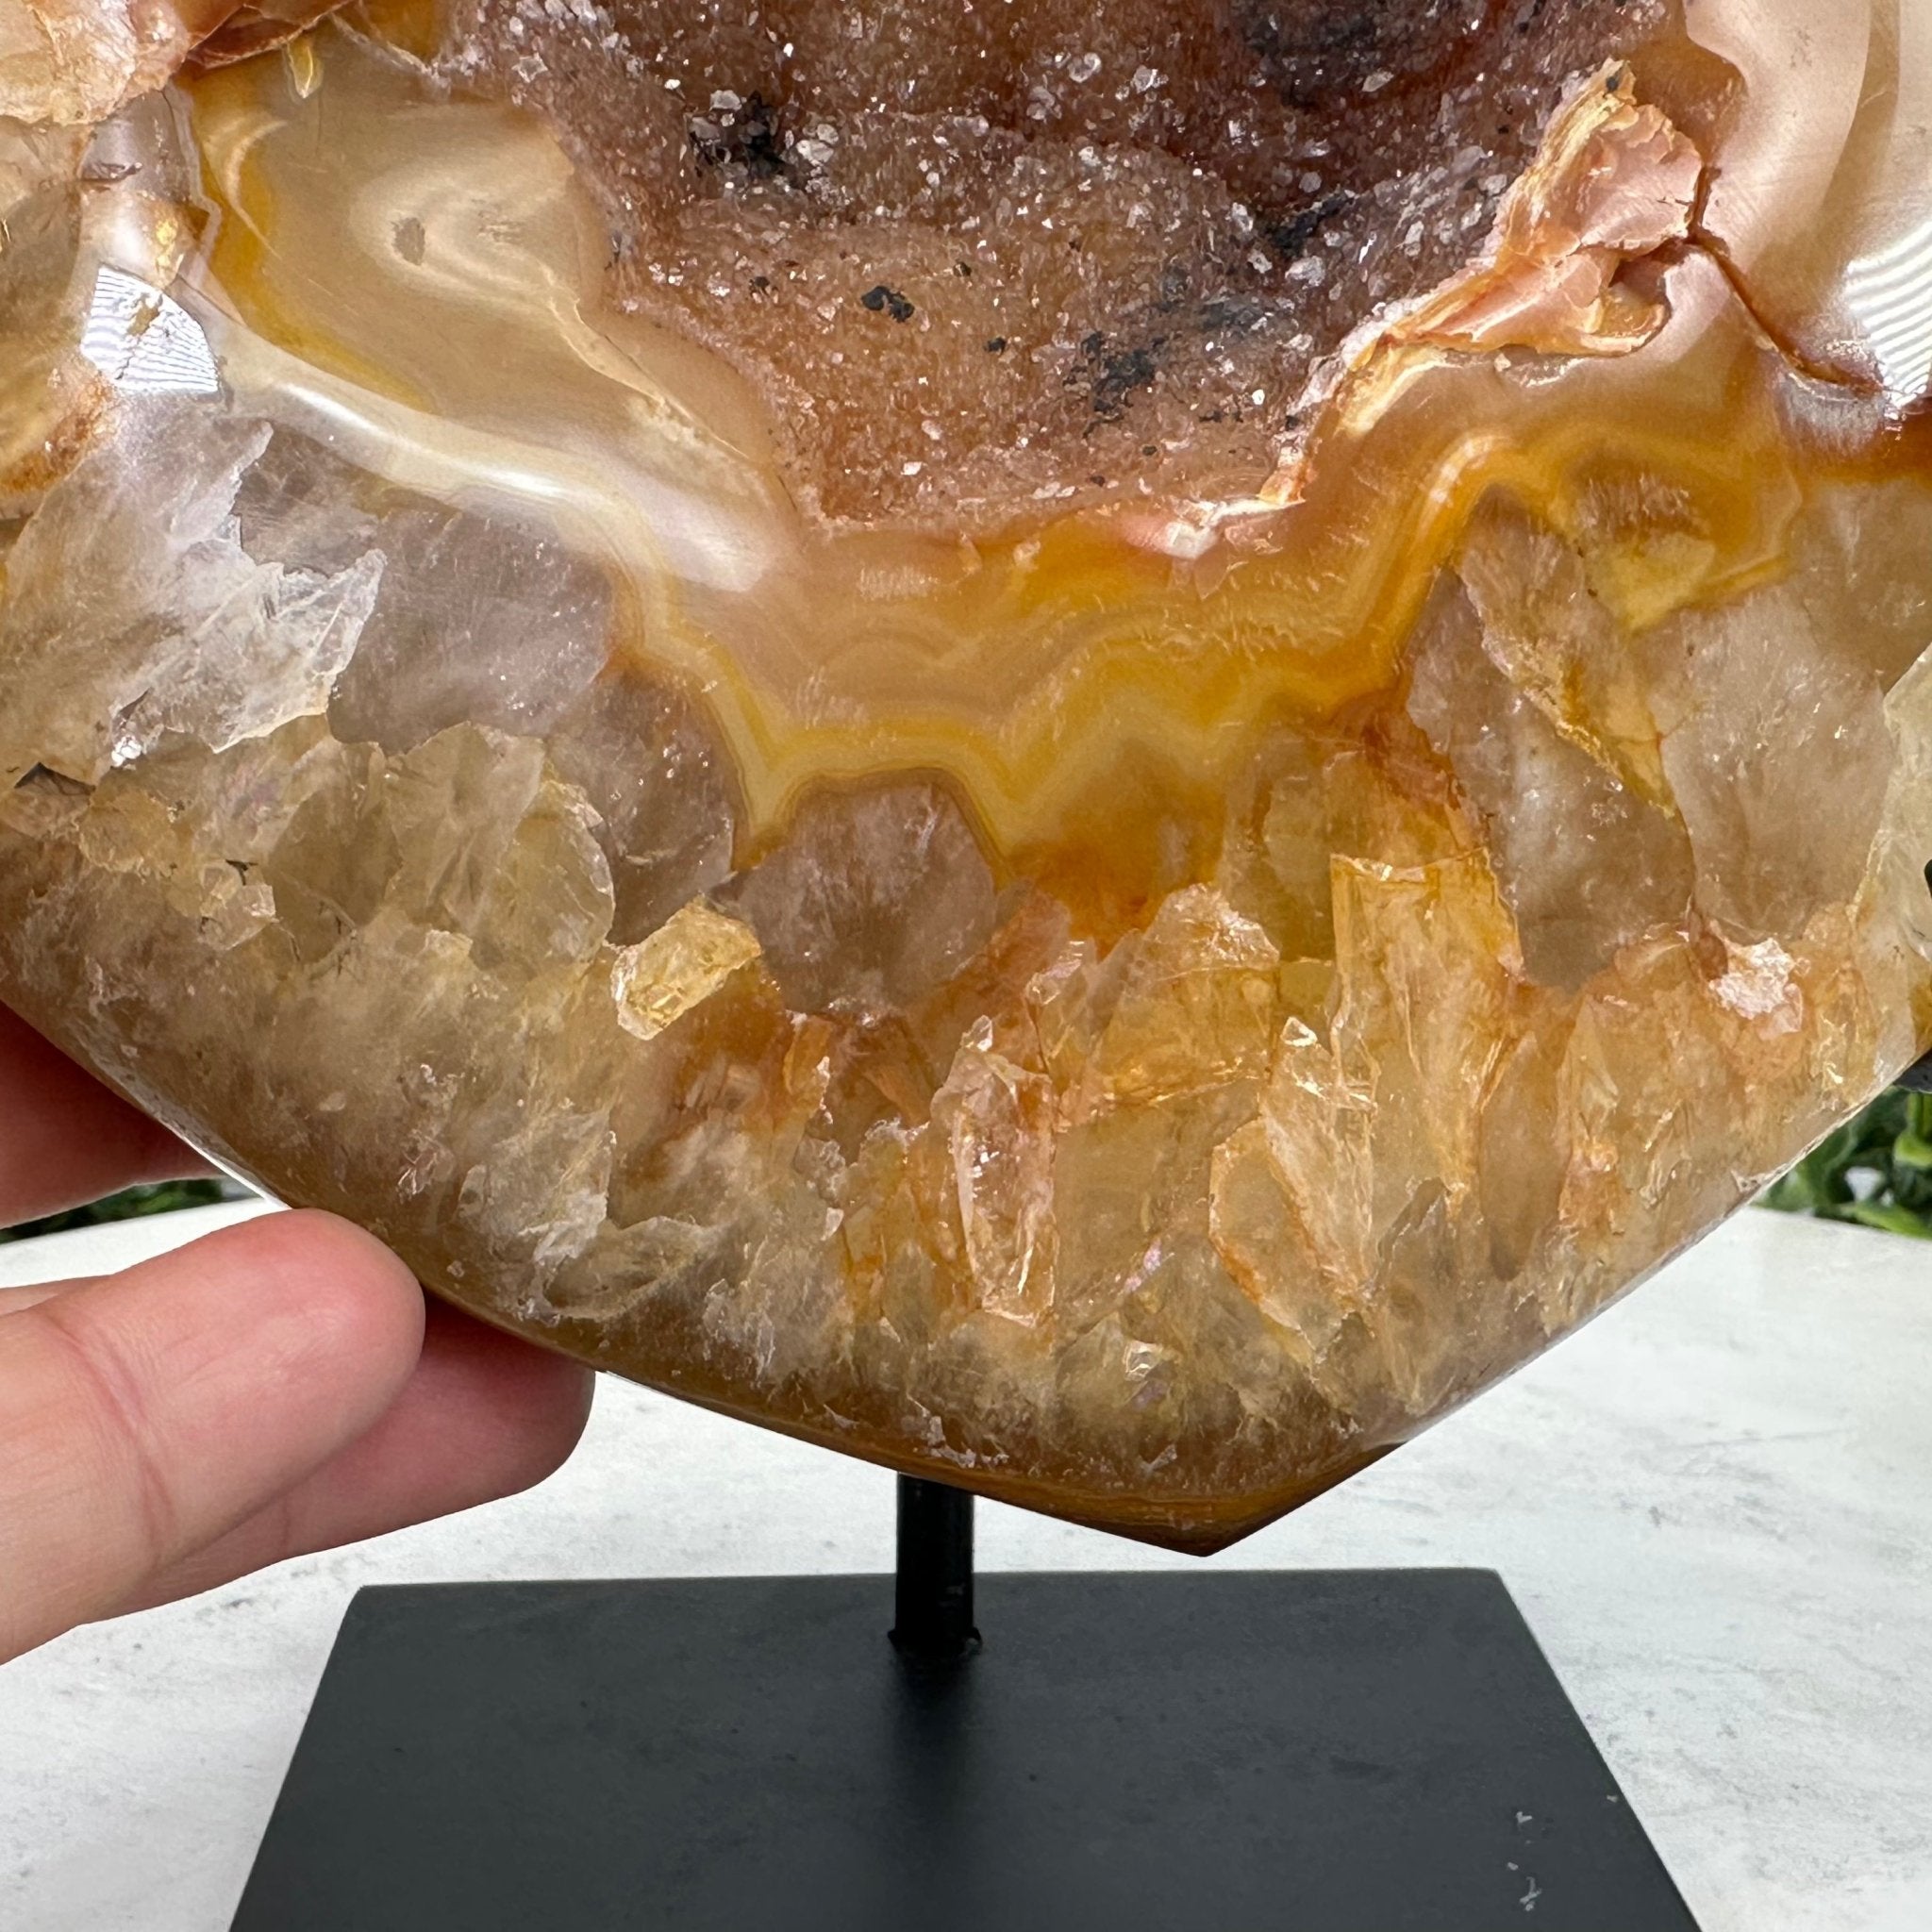 Polished Agate Heart-Shaped Geode on a Metal Stand, 4.7 lbs & 6.8" Tall, Model #5468-0013 by Brazil Gems - Brazil GemsBrazil GemsPolished Agate Heart-Shaped Geode on a Metal Stand, 4.7 lbs & 6.8" Tall, Model #5468-0013 by Brazil GemsHearts5468-0013